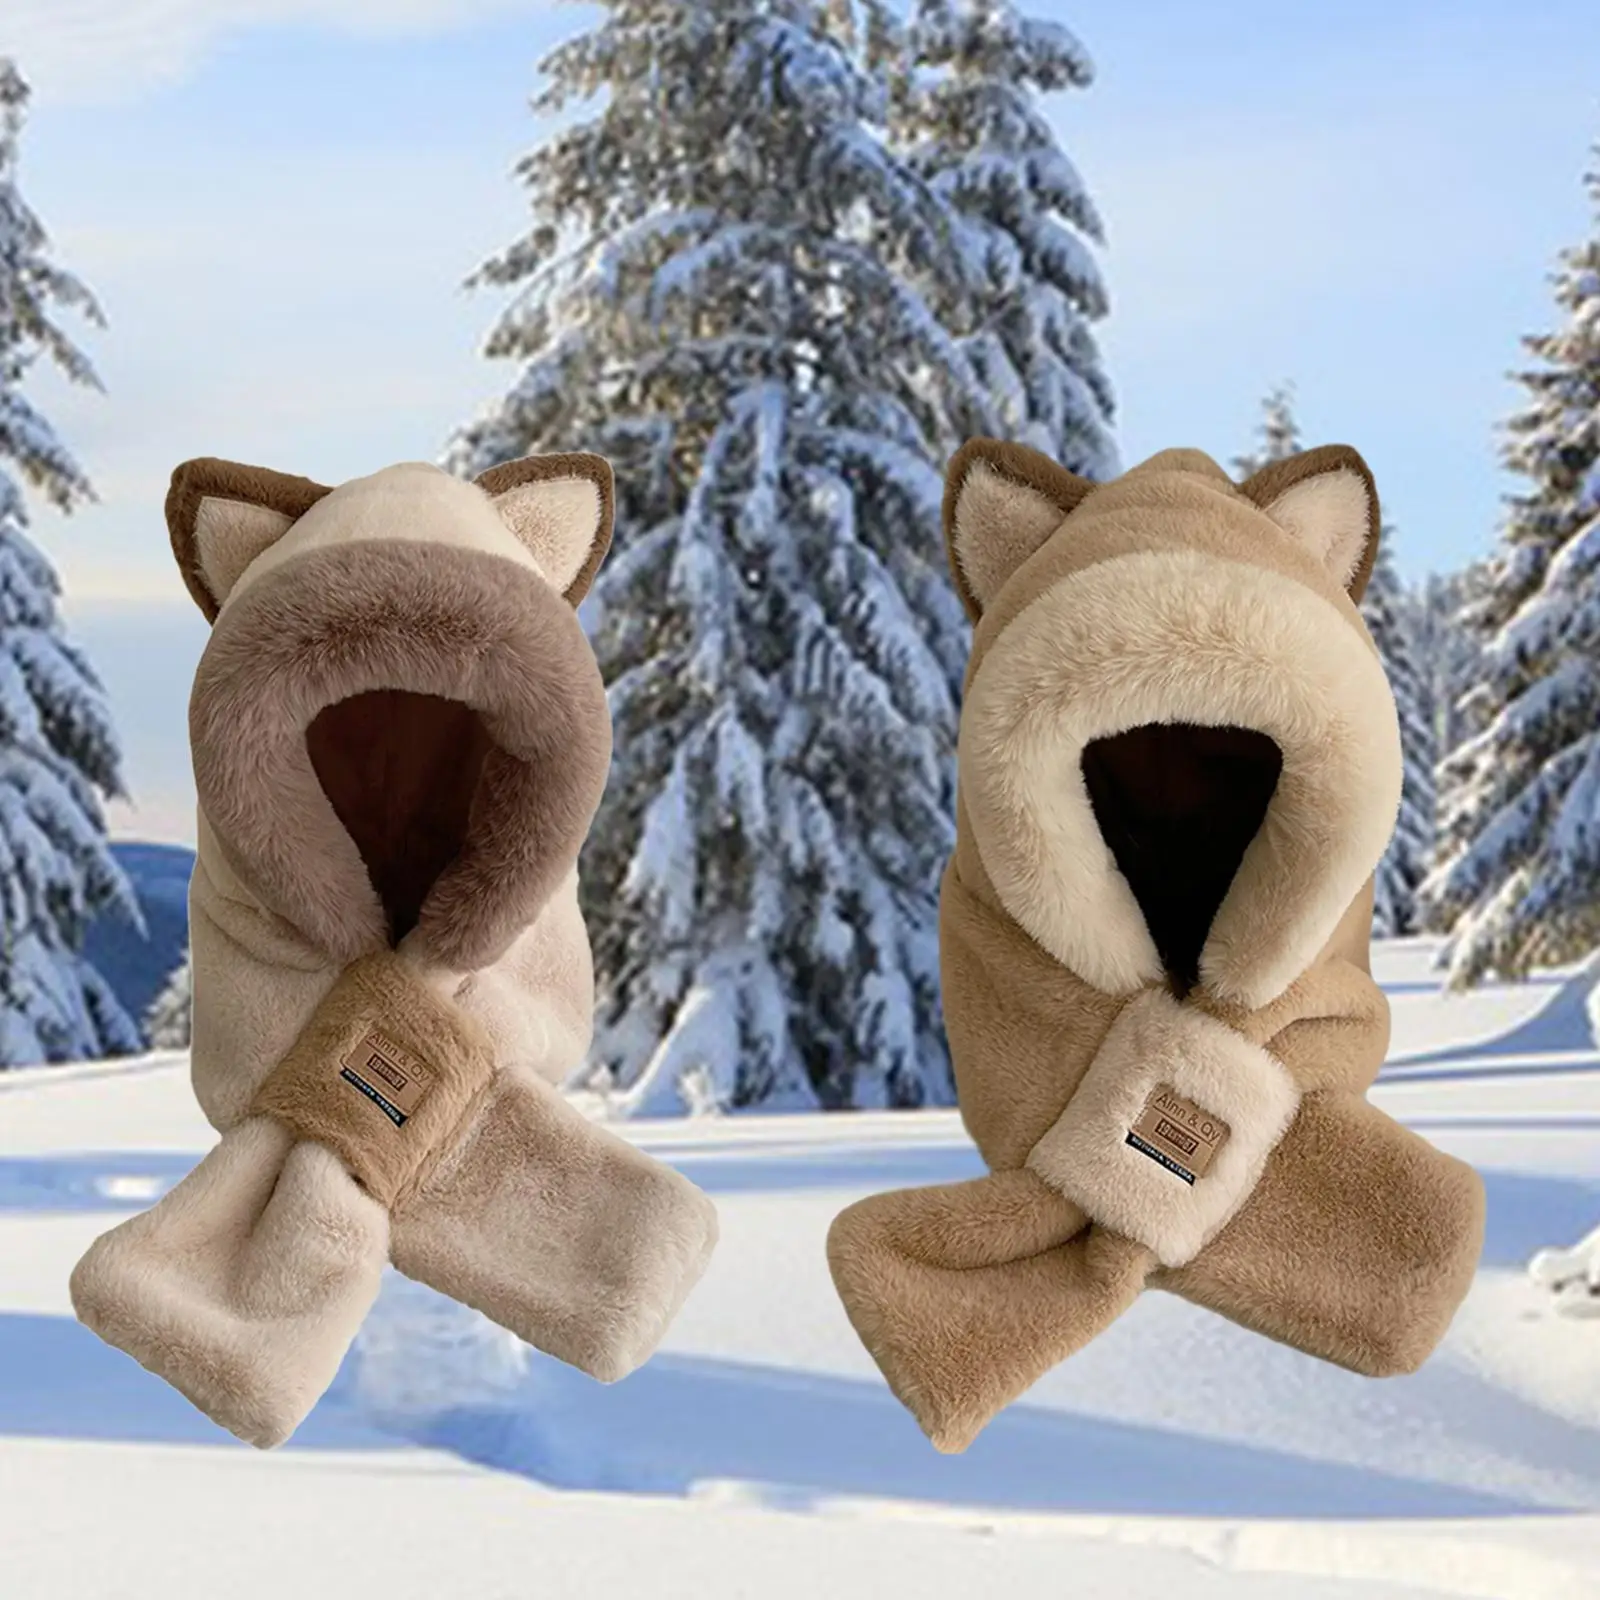 Plush Hooded Scarf for Women Shawl Wraps Hooded Hat Winter Hat Scarf Set for Travel Riding Themed Party Outdoor Valentine`s Gift